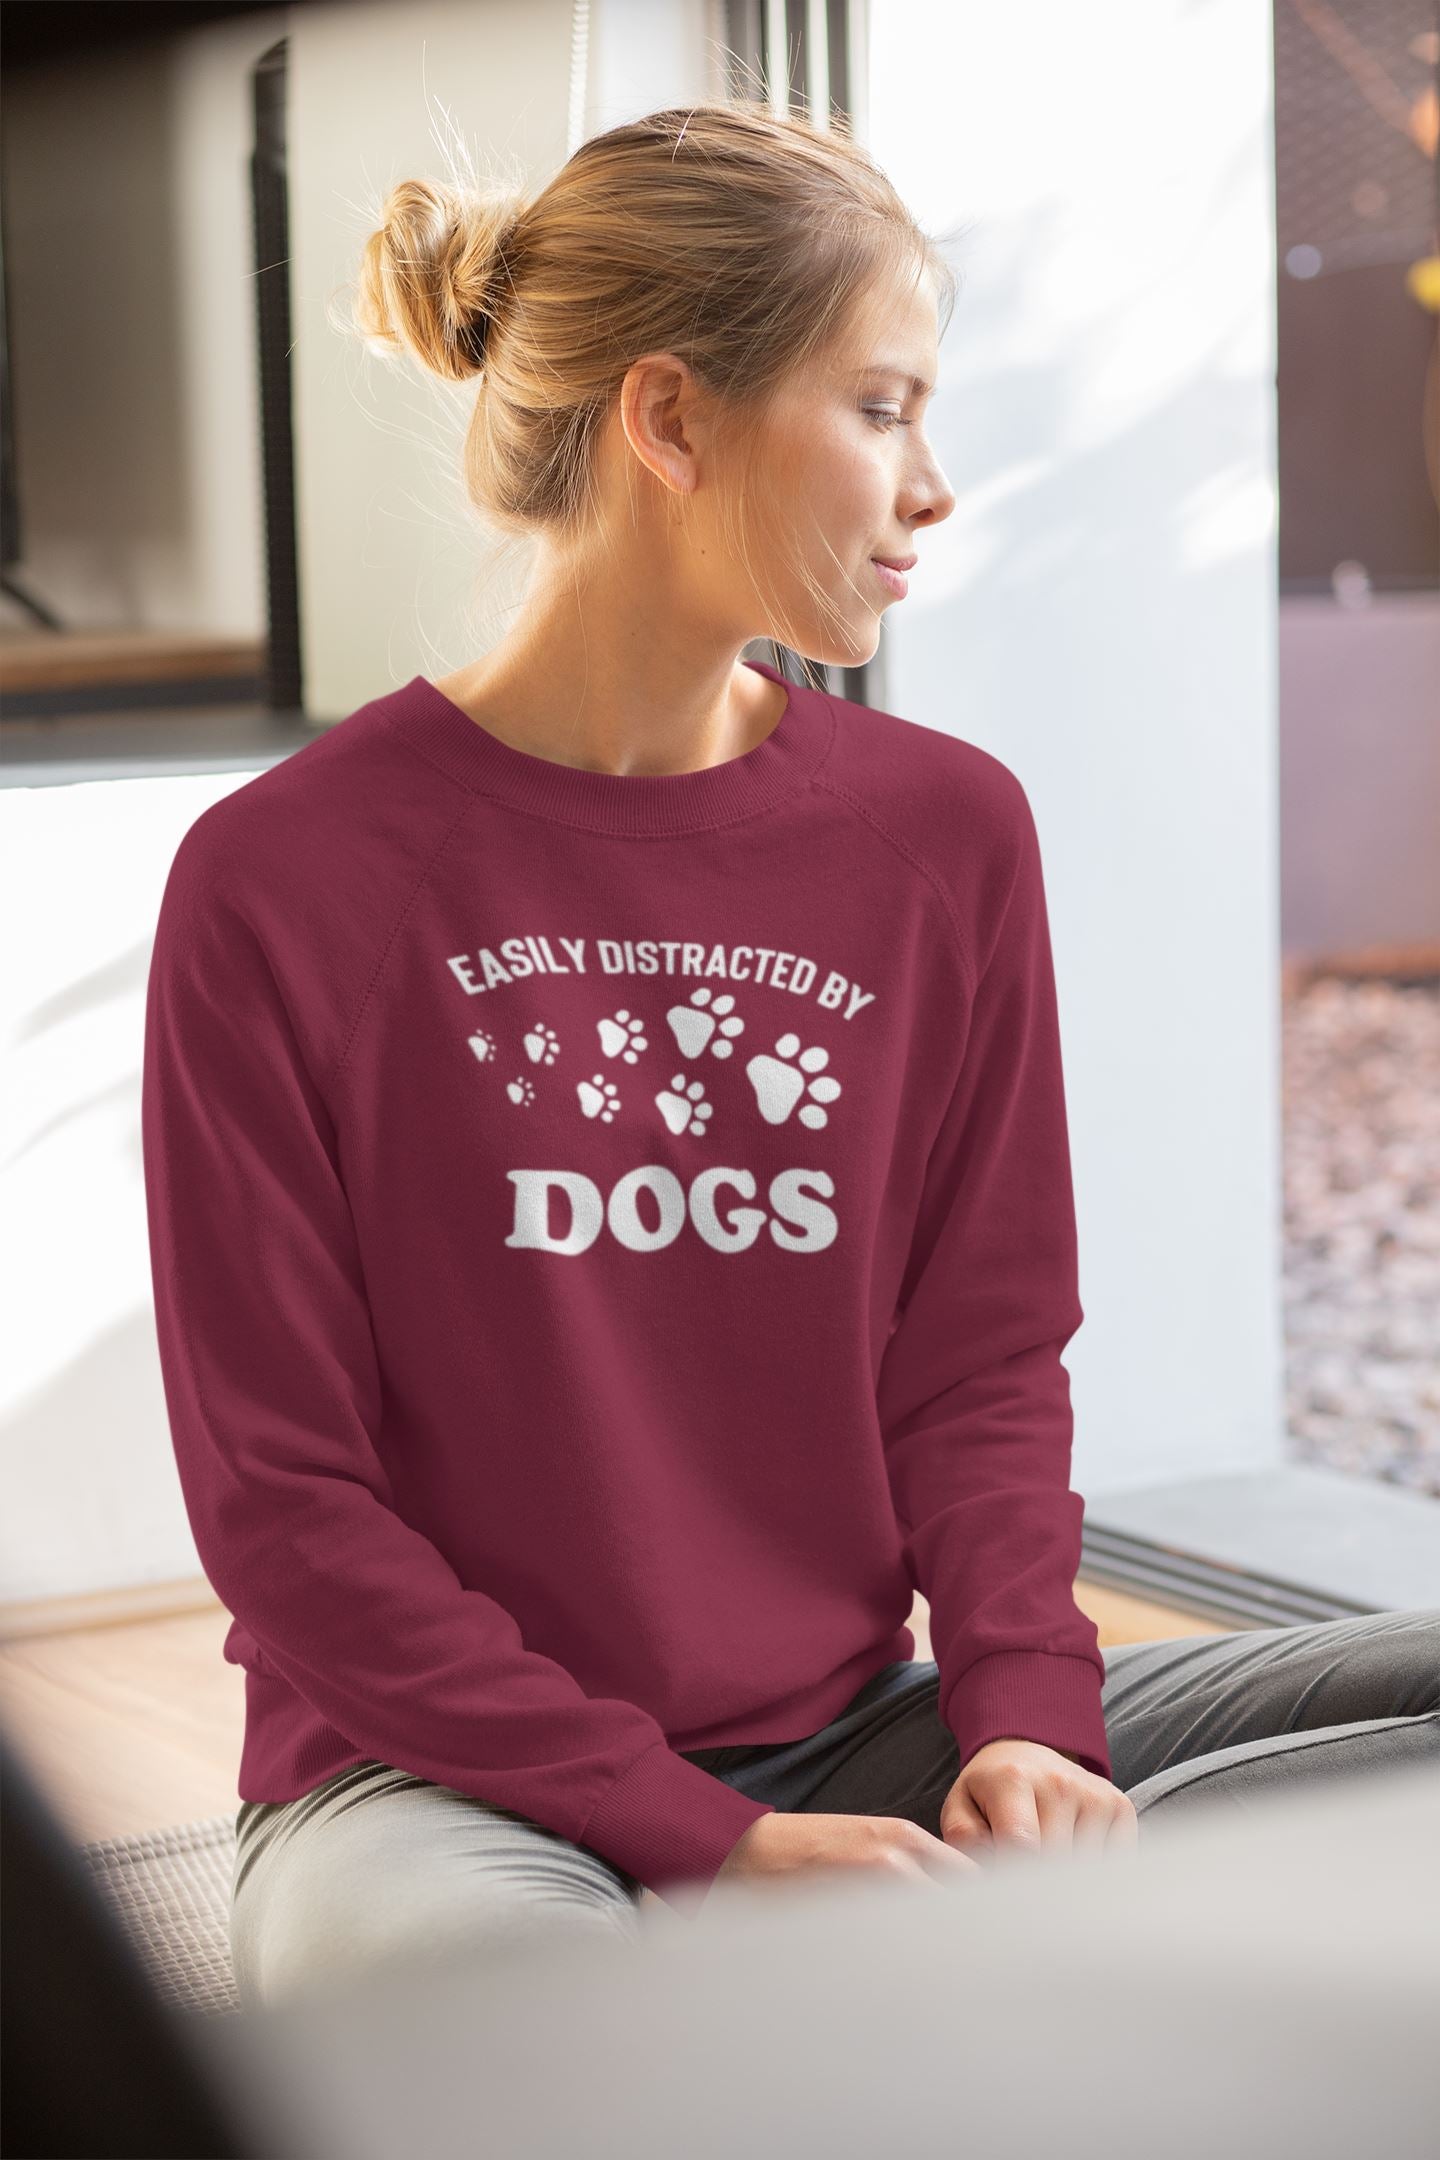 Easily Distracted by Dogs Sweatshirt